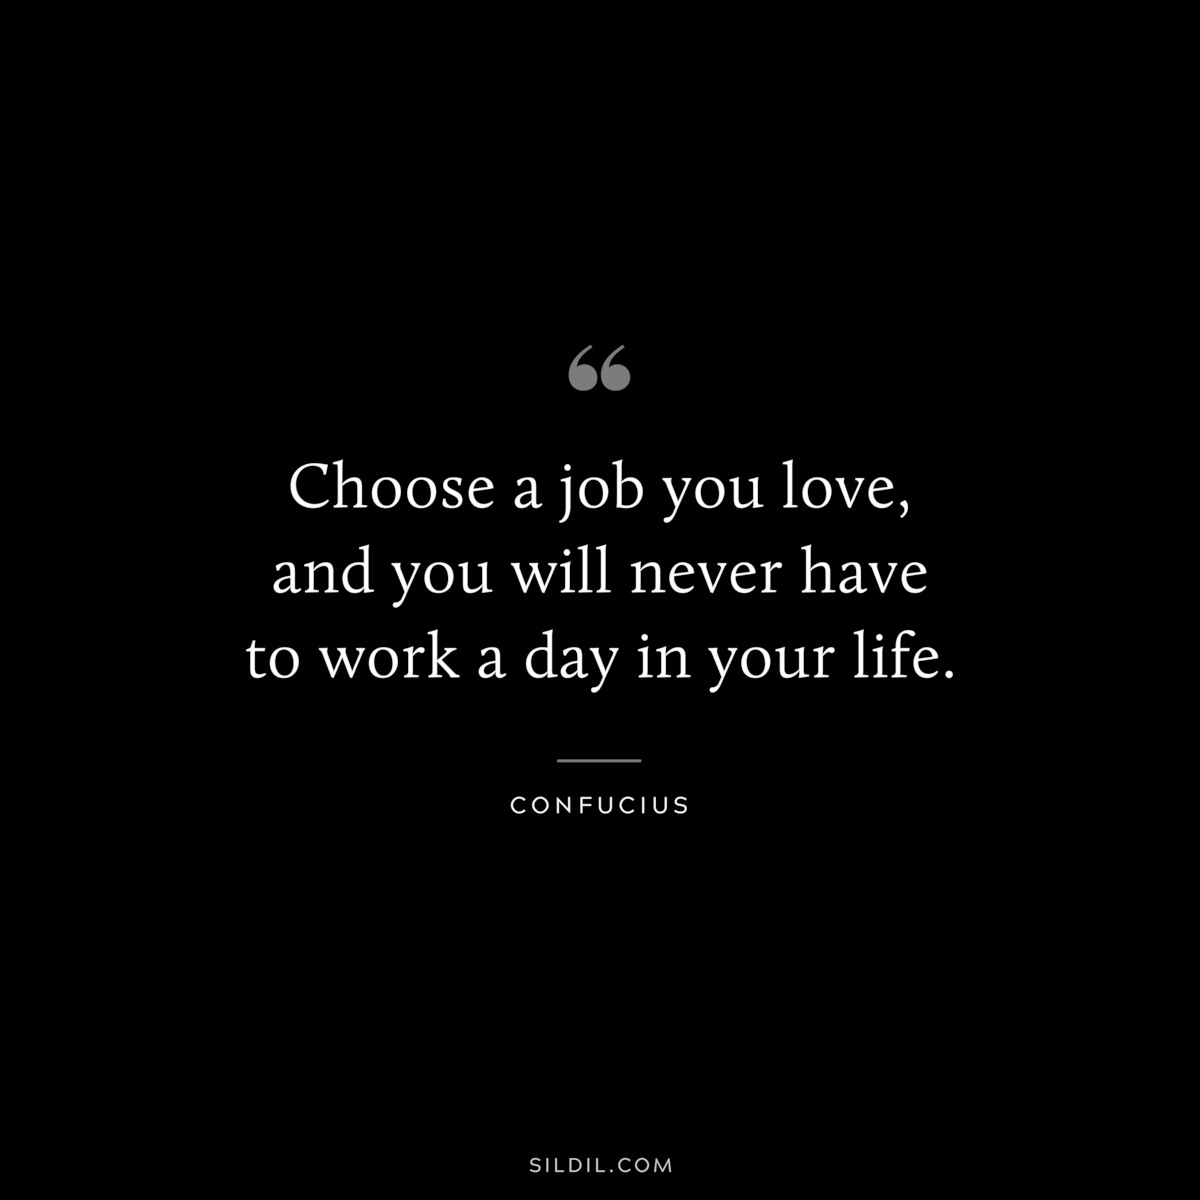 Choose a job you love, and you will never have to work a day in your life. ― Confucius